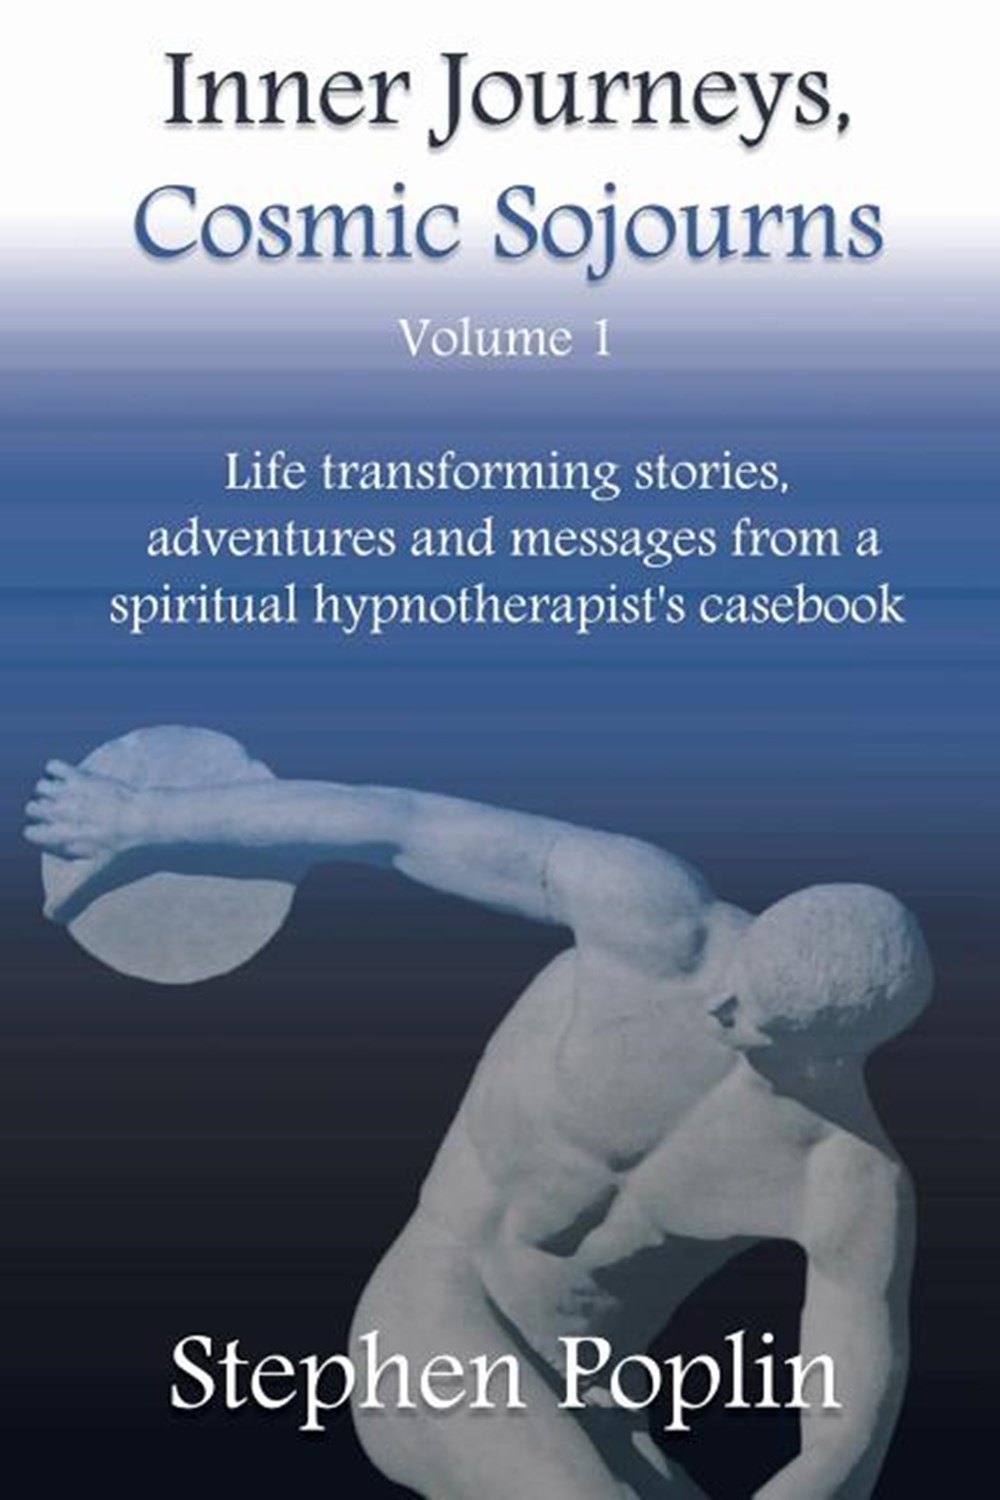 Inner Journeys, Cosmic Sojourns: Life transforming stories, adventures and messages from a spiritual